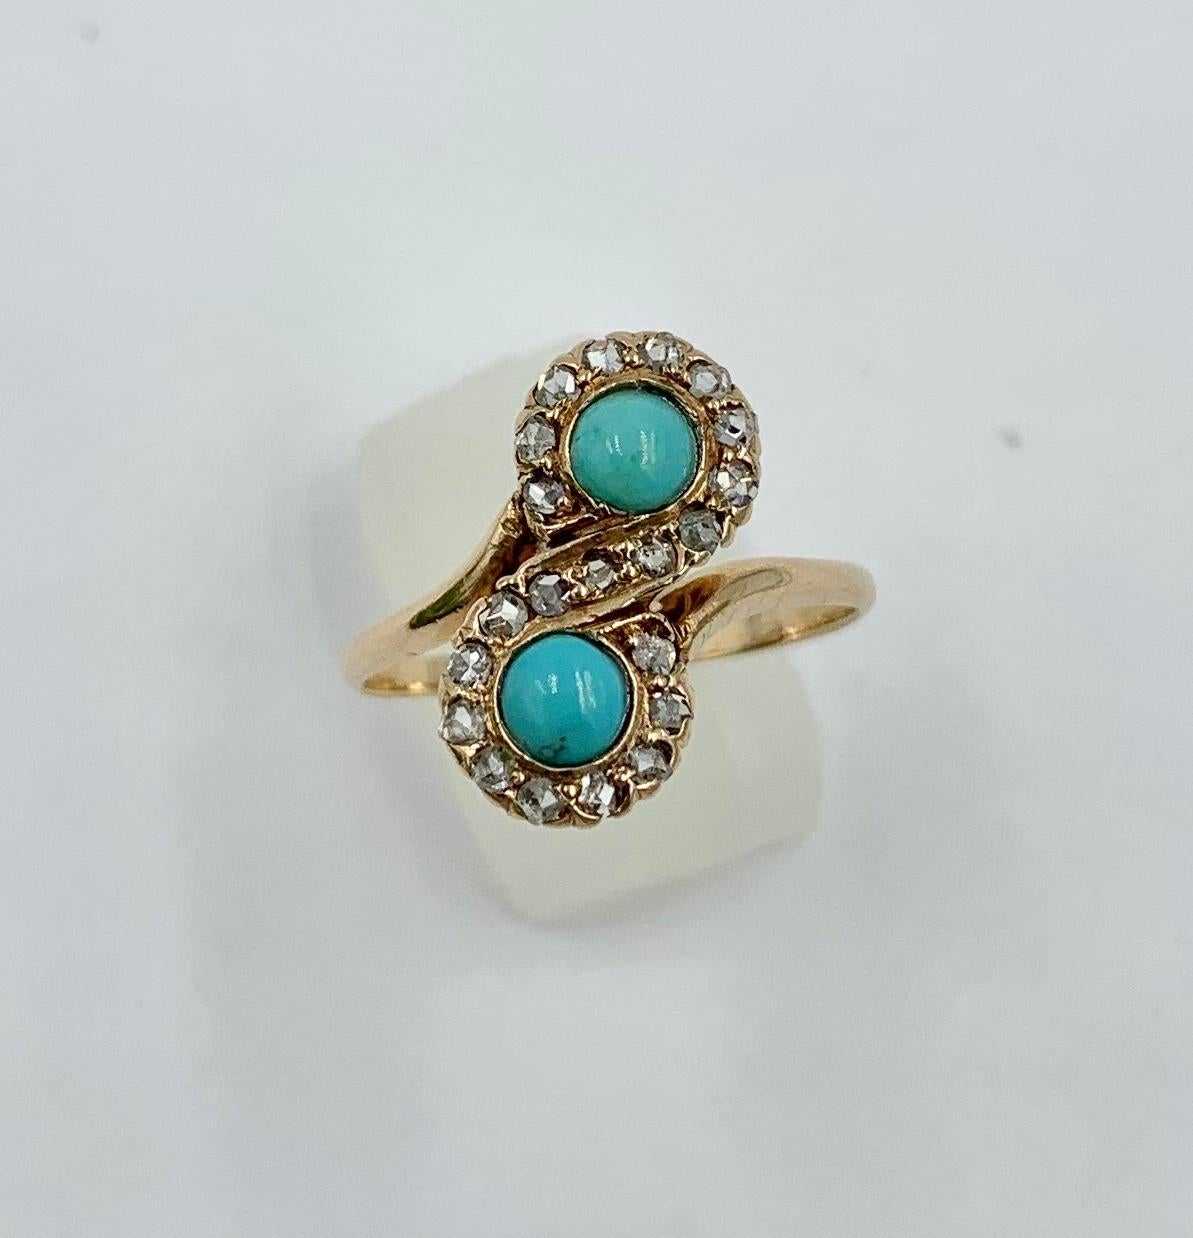 An Antique Victorian - Edwardian Ring with two gorgeous natural Persian Turquoise cabochons of stunning beauty. The Turquoise gems are surrounded by a twisting halo of 21 sparkling antique Rose Cut Diamonds. This design is often referred to as Toi